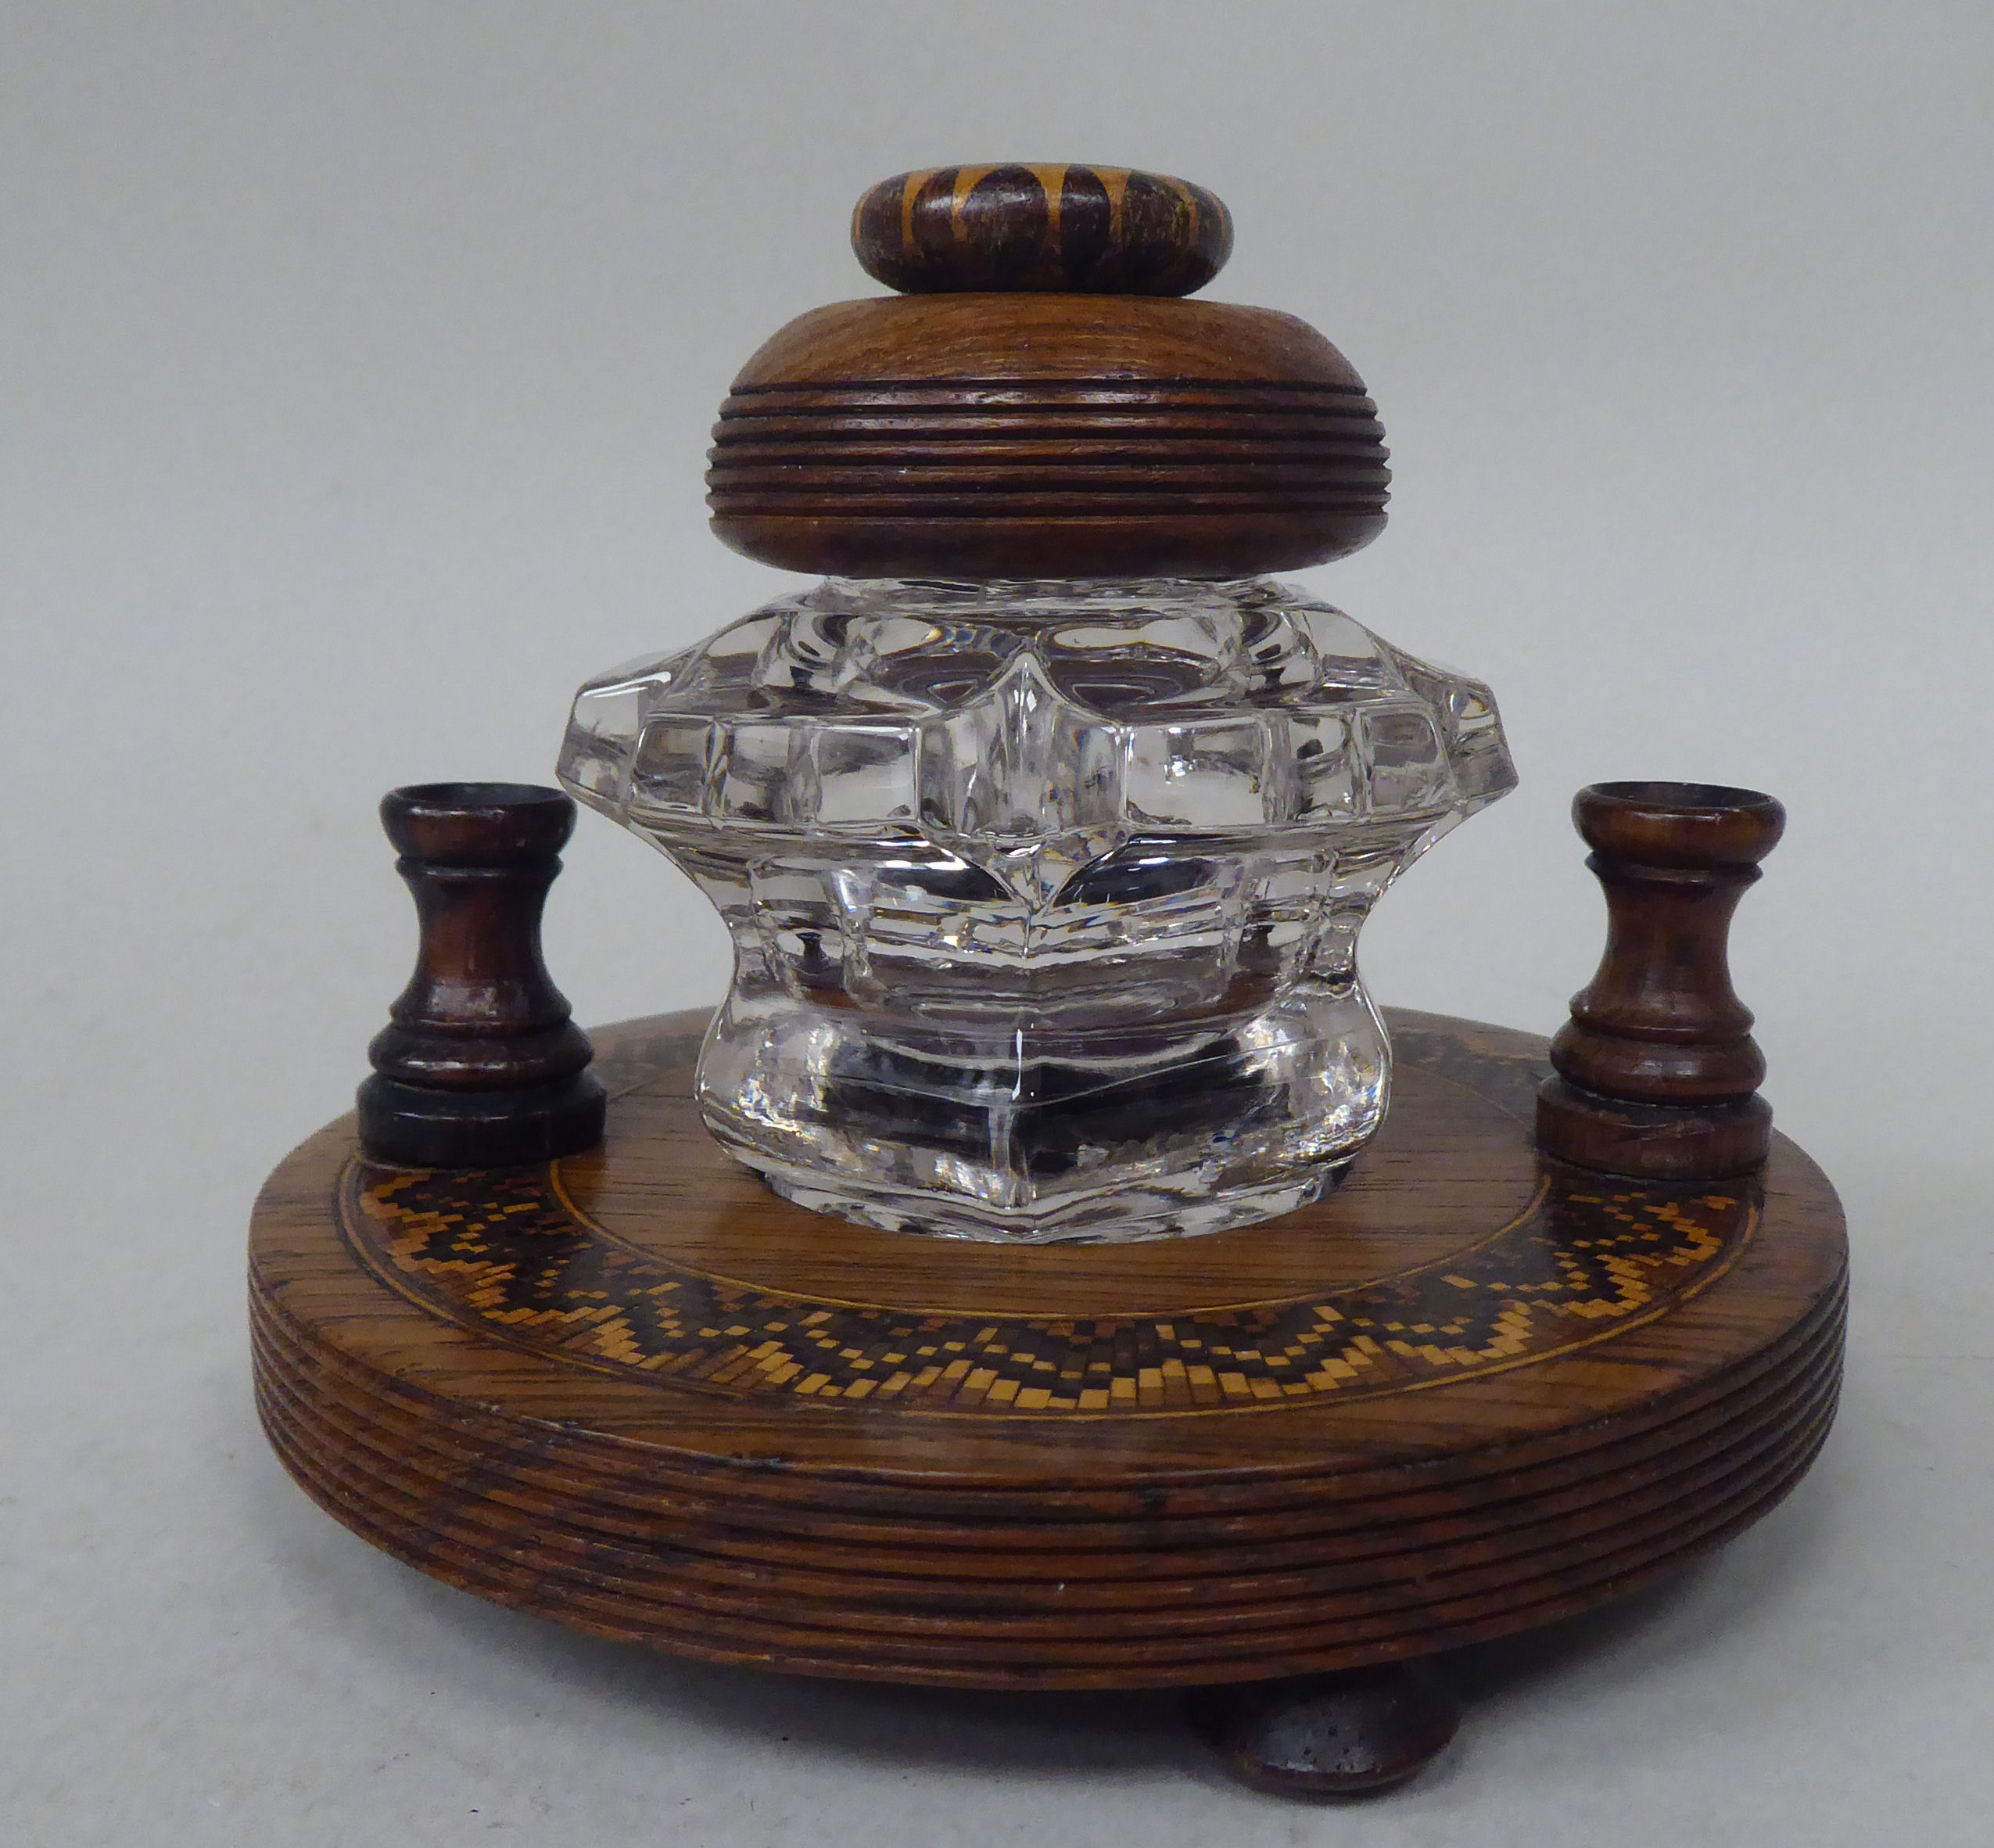 A Tonbridgeware rosewood inkstand with a moulded glass reservoir and cap, on a circular platform,